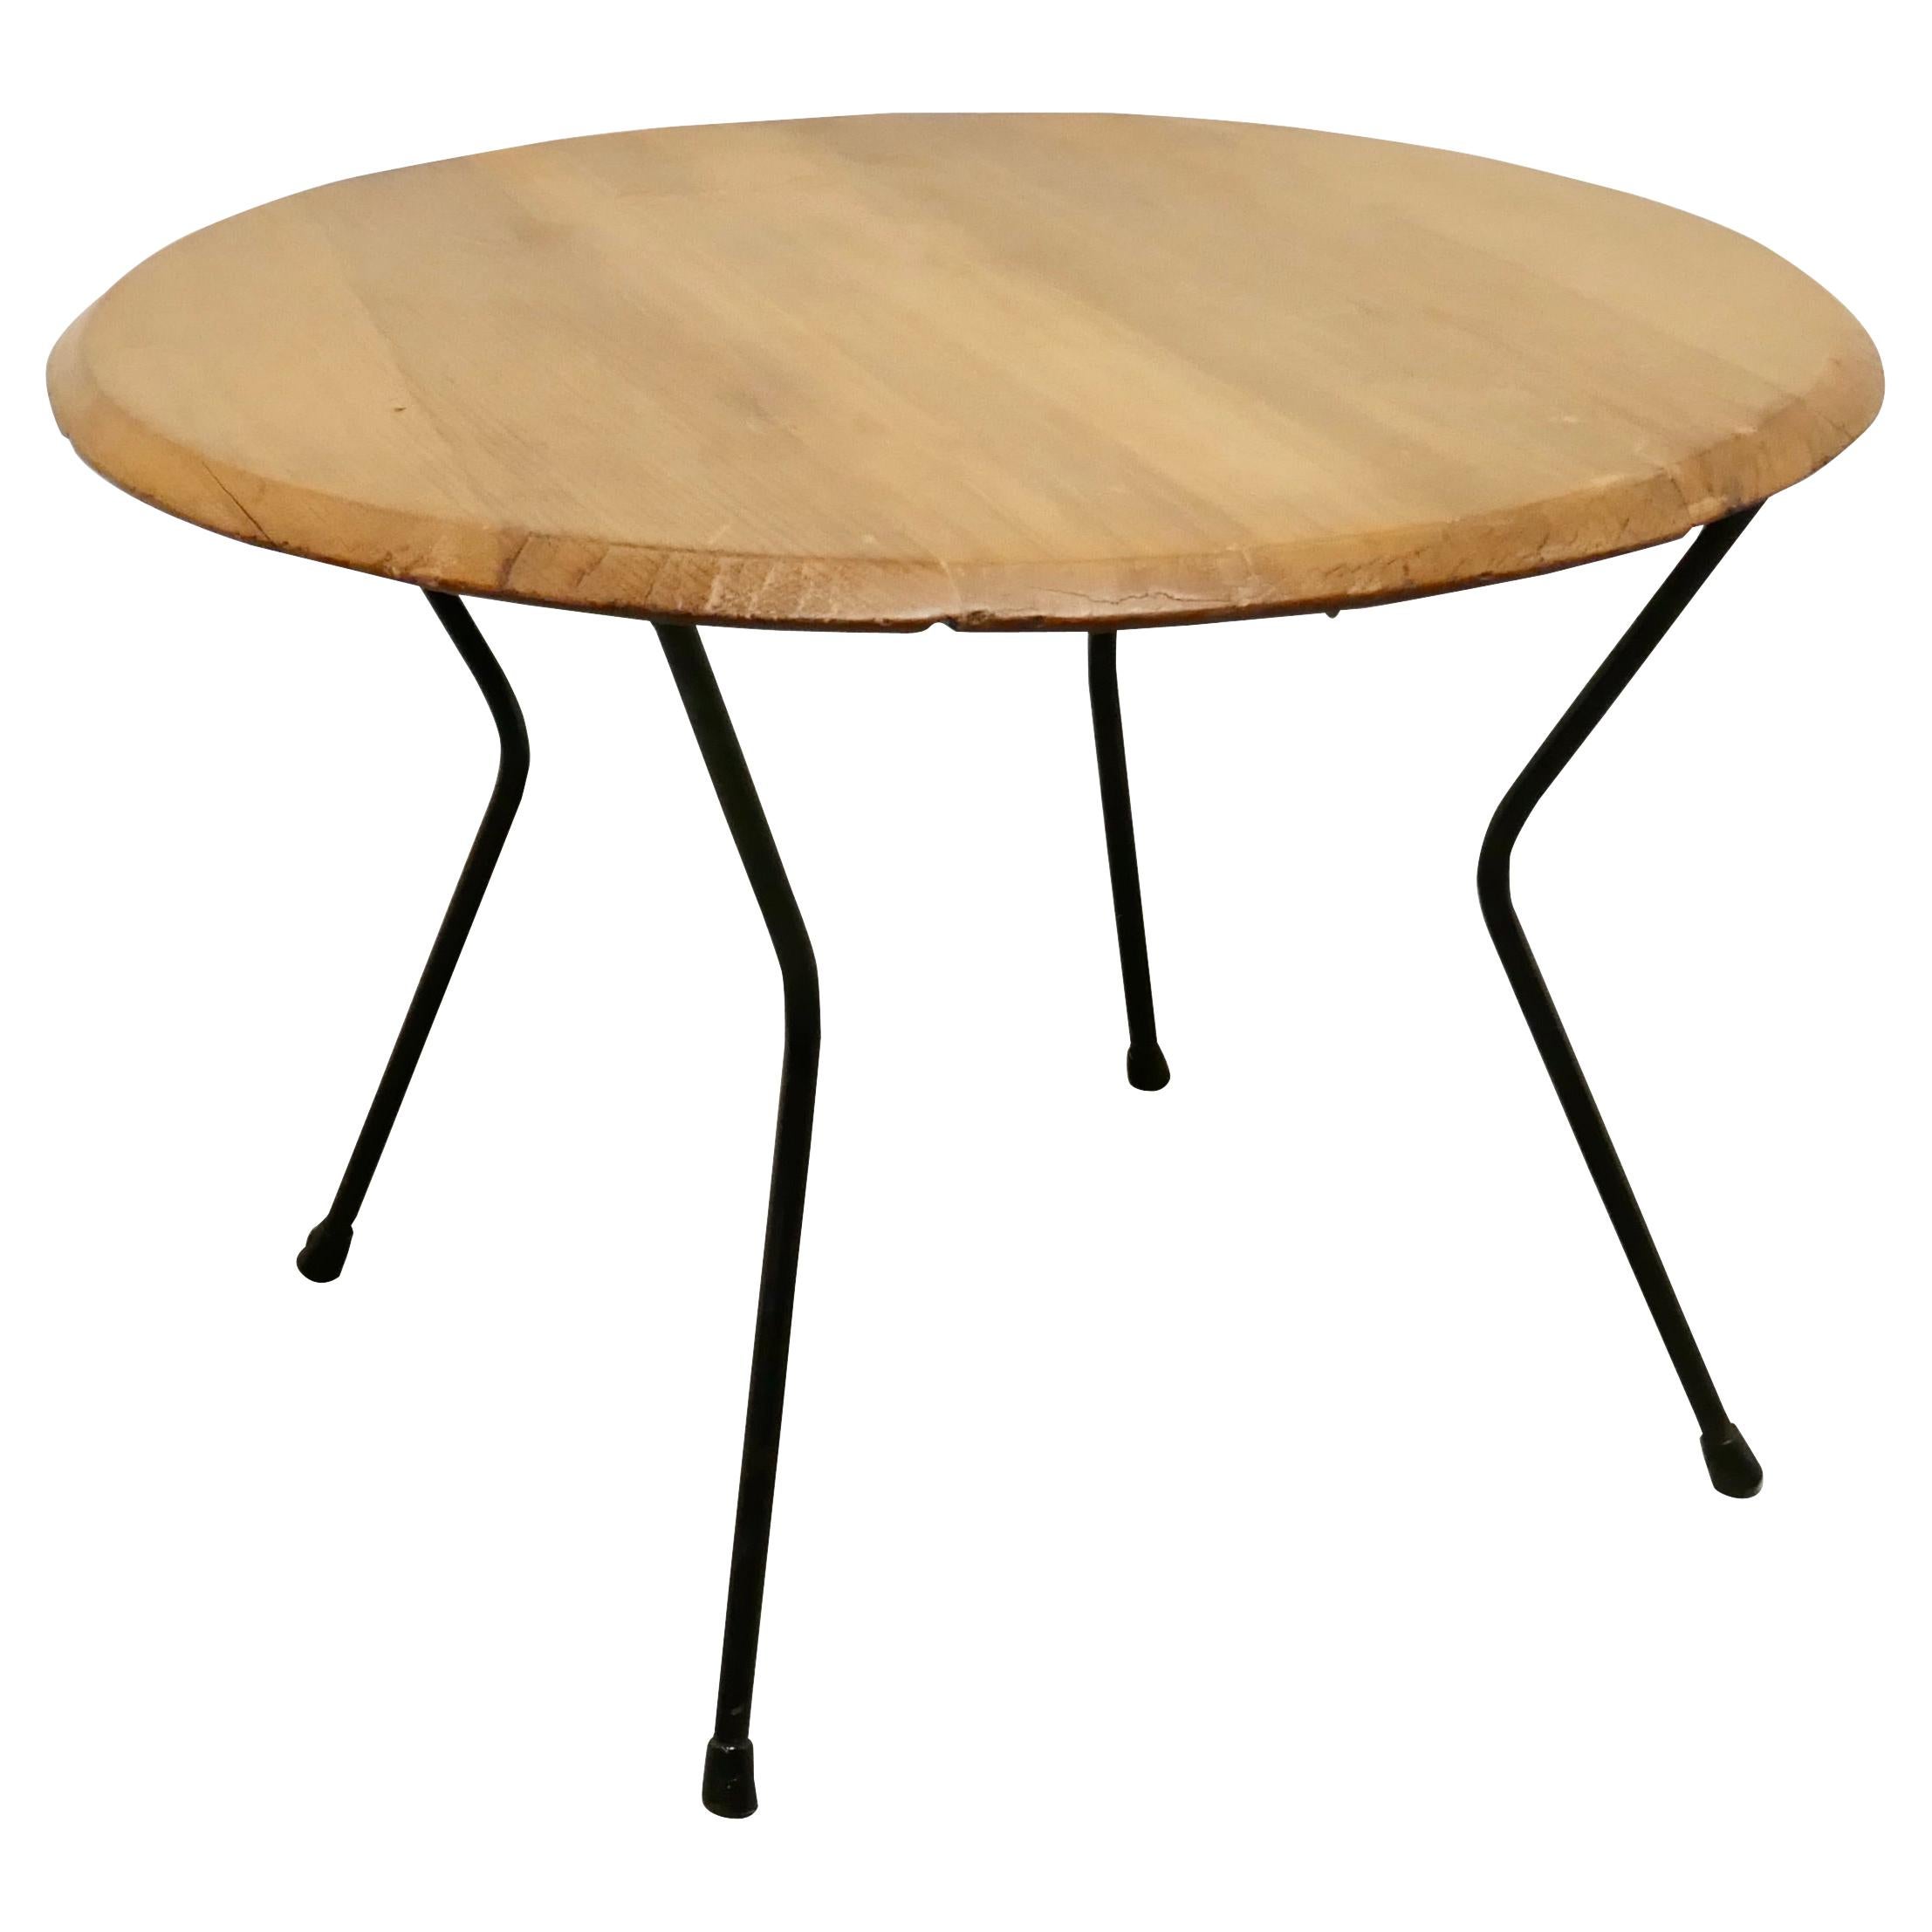 Very Stylish Round Retro Coffee Table For Sale